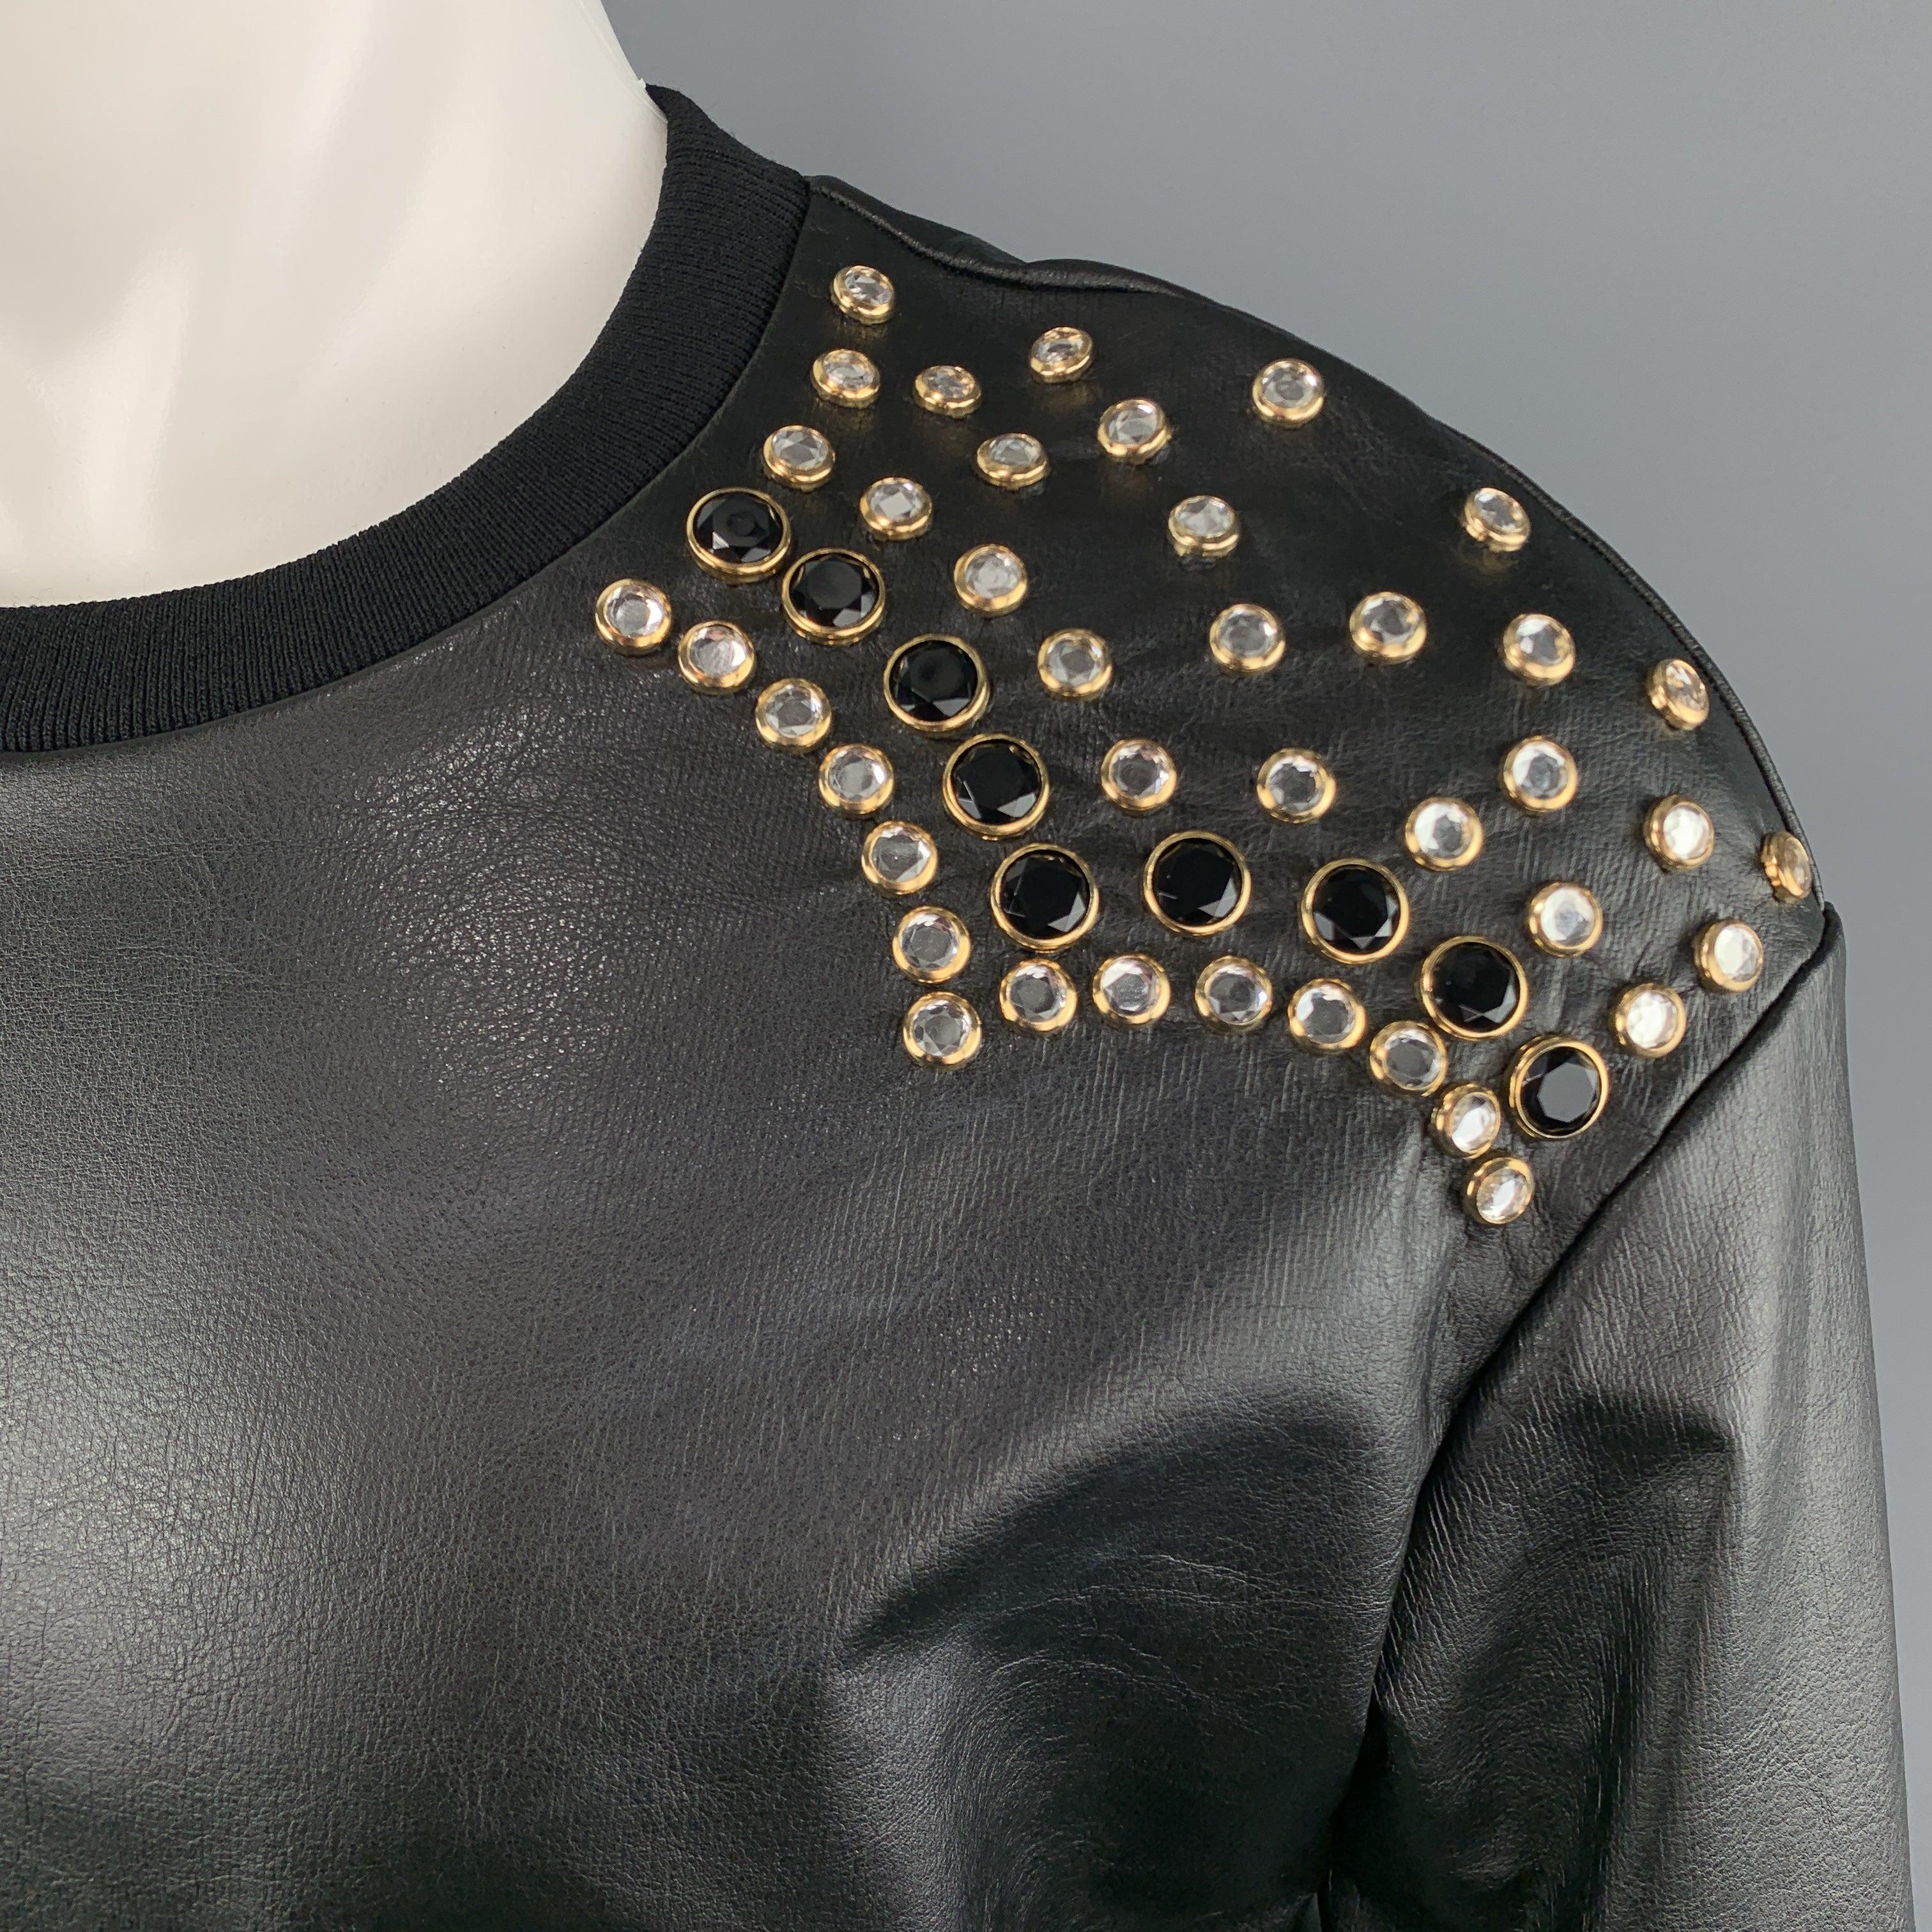 JUST CAVALLI western pullover comes in black coated leather effect cotton jersey with a ribbed crew neck and gold tone black and clear rhinestone studded shoulders. Made in Italy.
Excellent
Pre-Owned Condition. 

Marked:   IT 44 

Measurements: 
